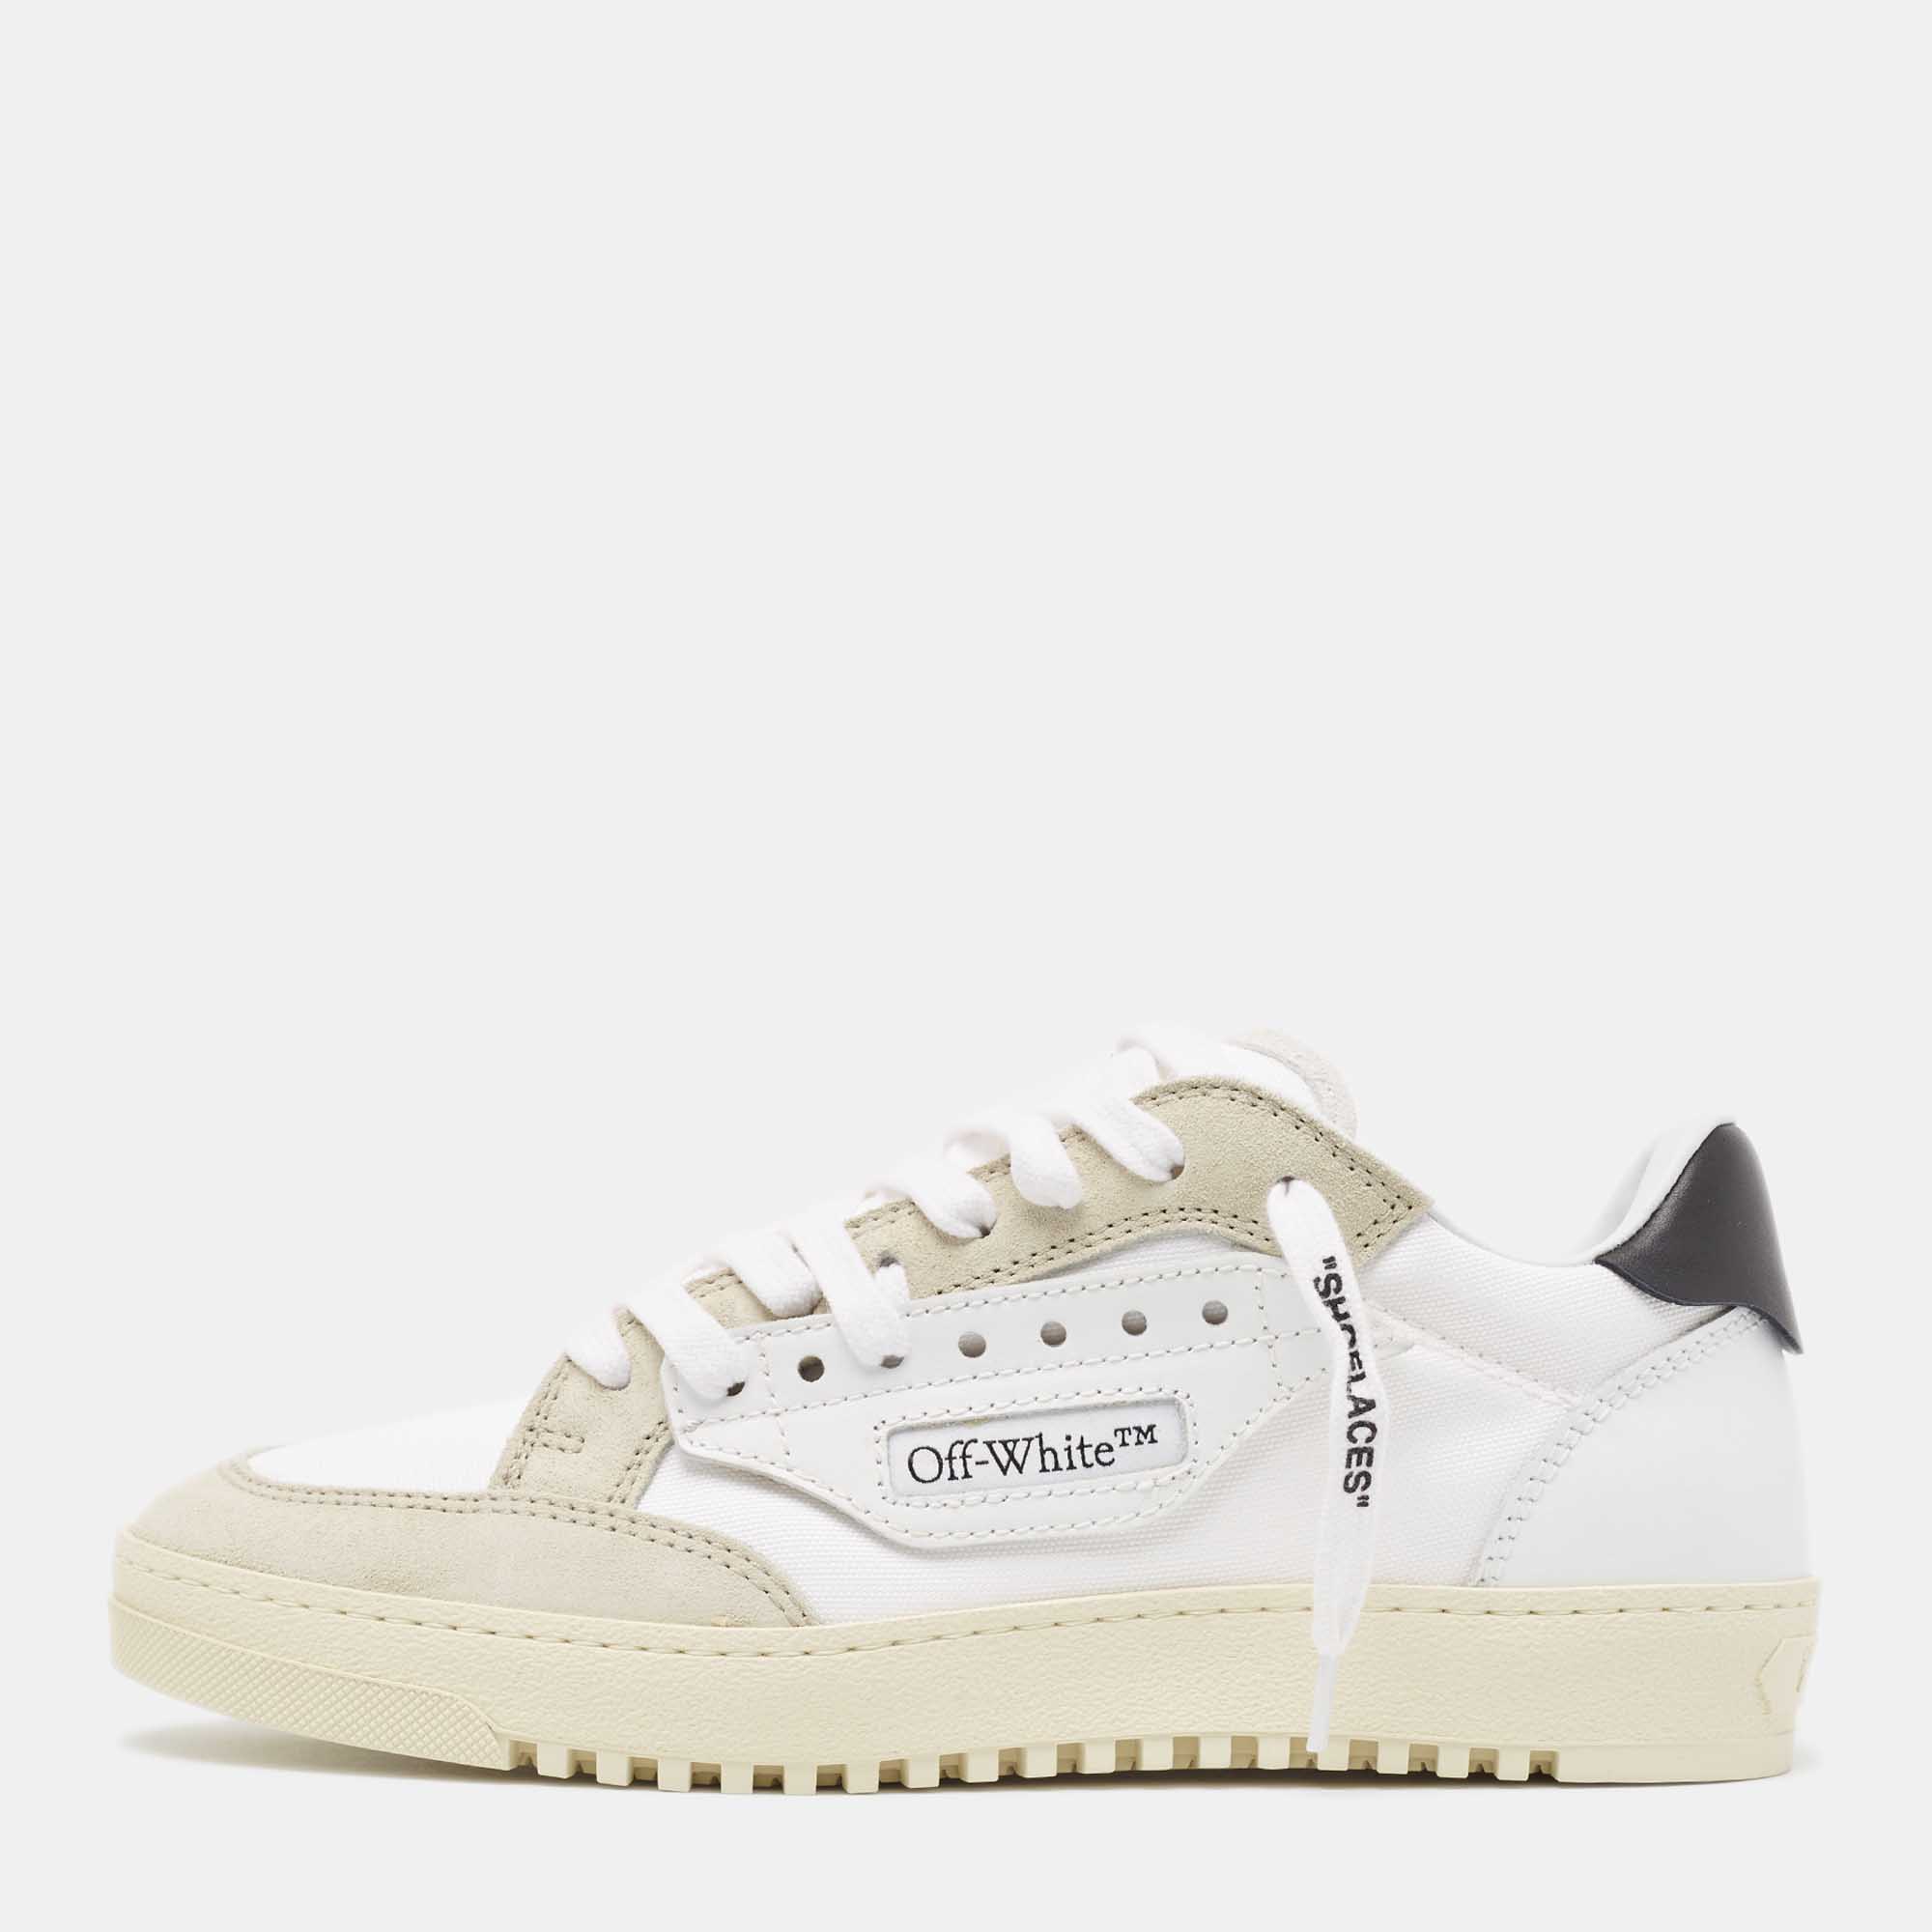 Off-white multicolor canvas and leather 5.0 sneakers size 38